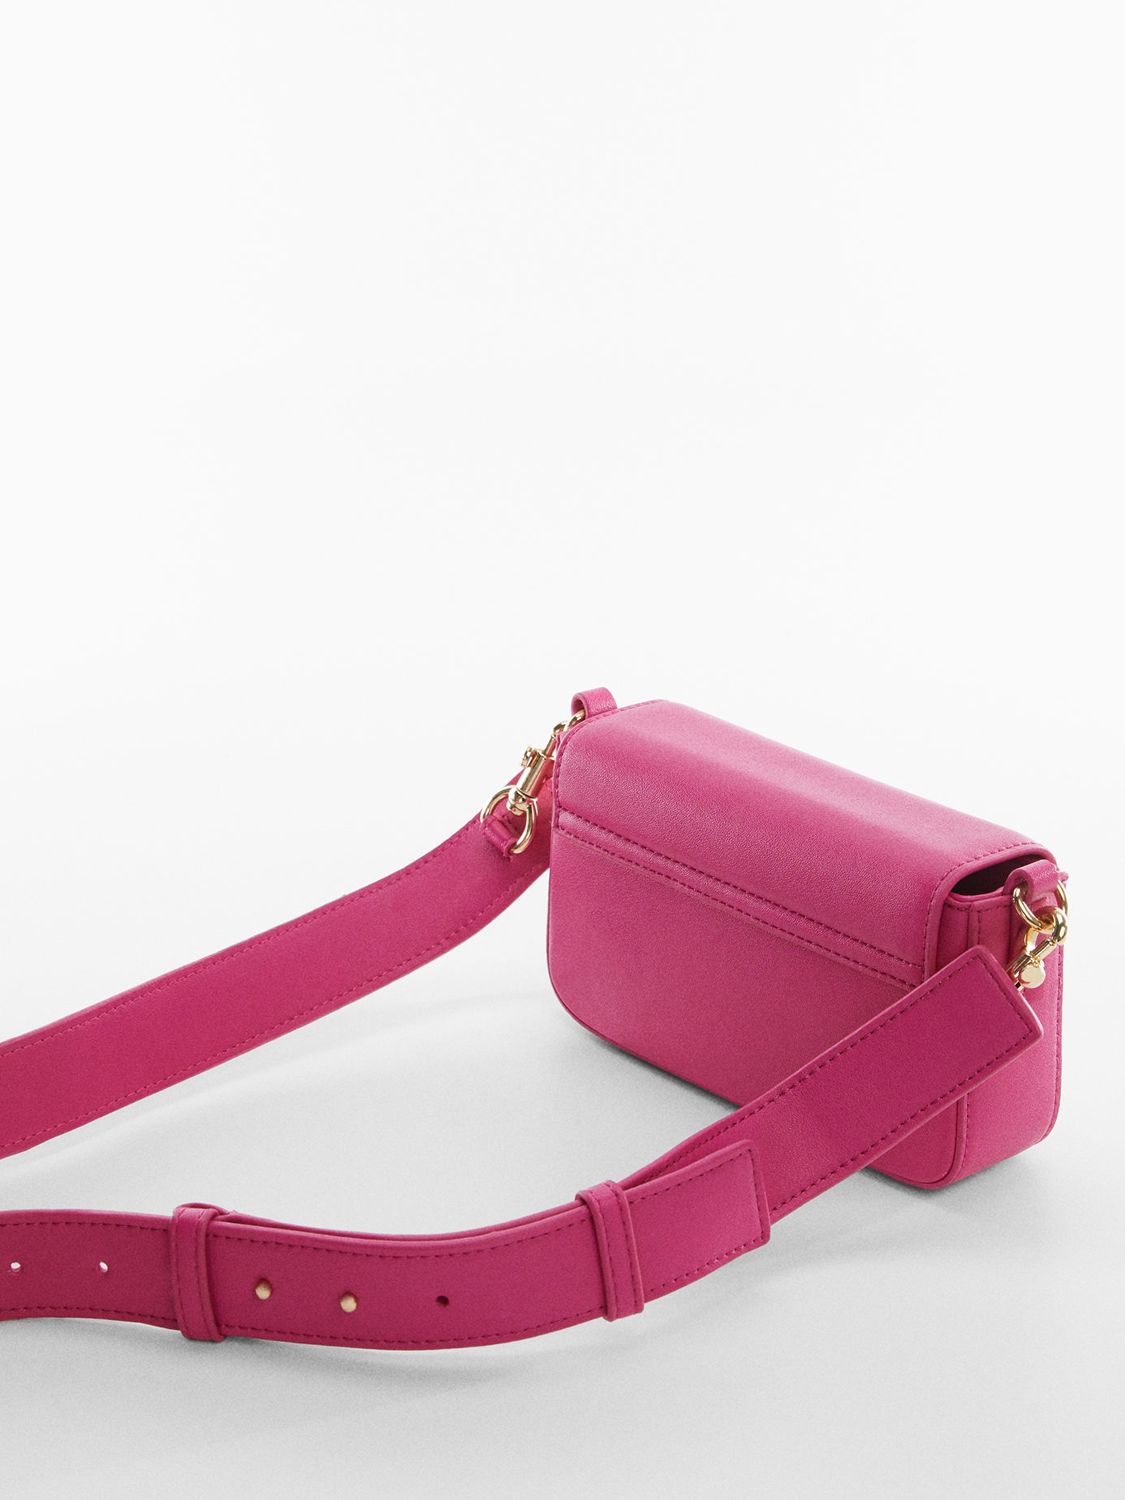 Mango Oasis Small Cross Body Bag, Bright Pink, One Size